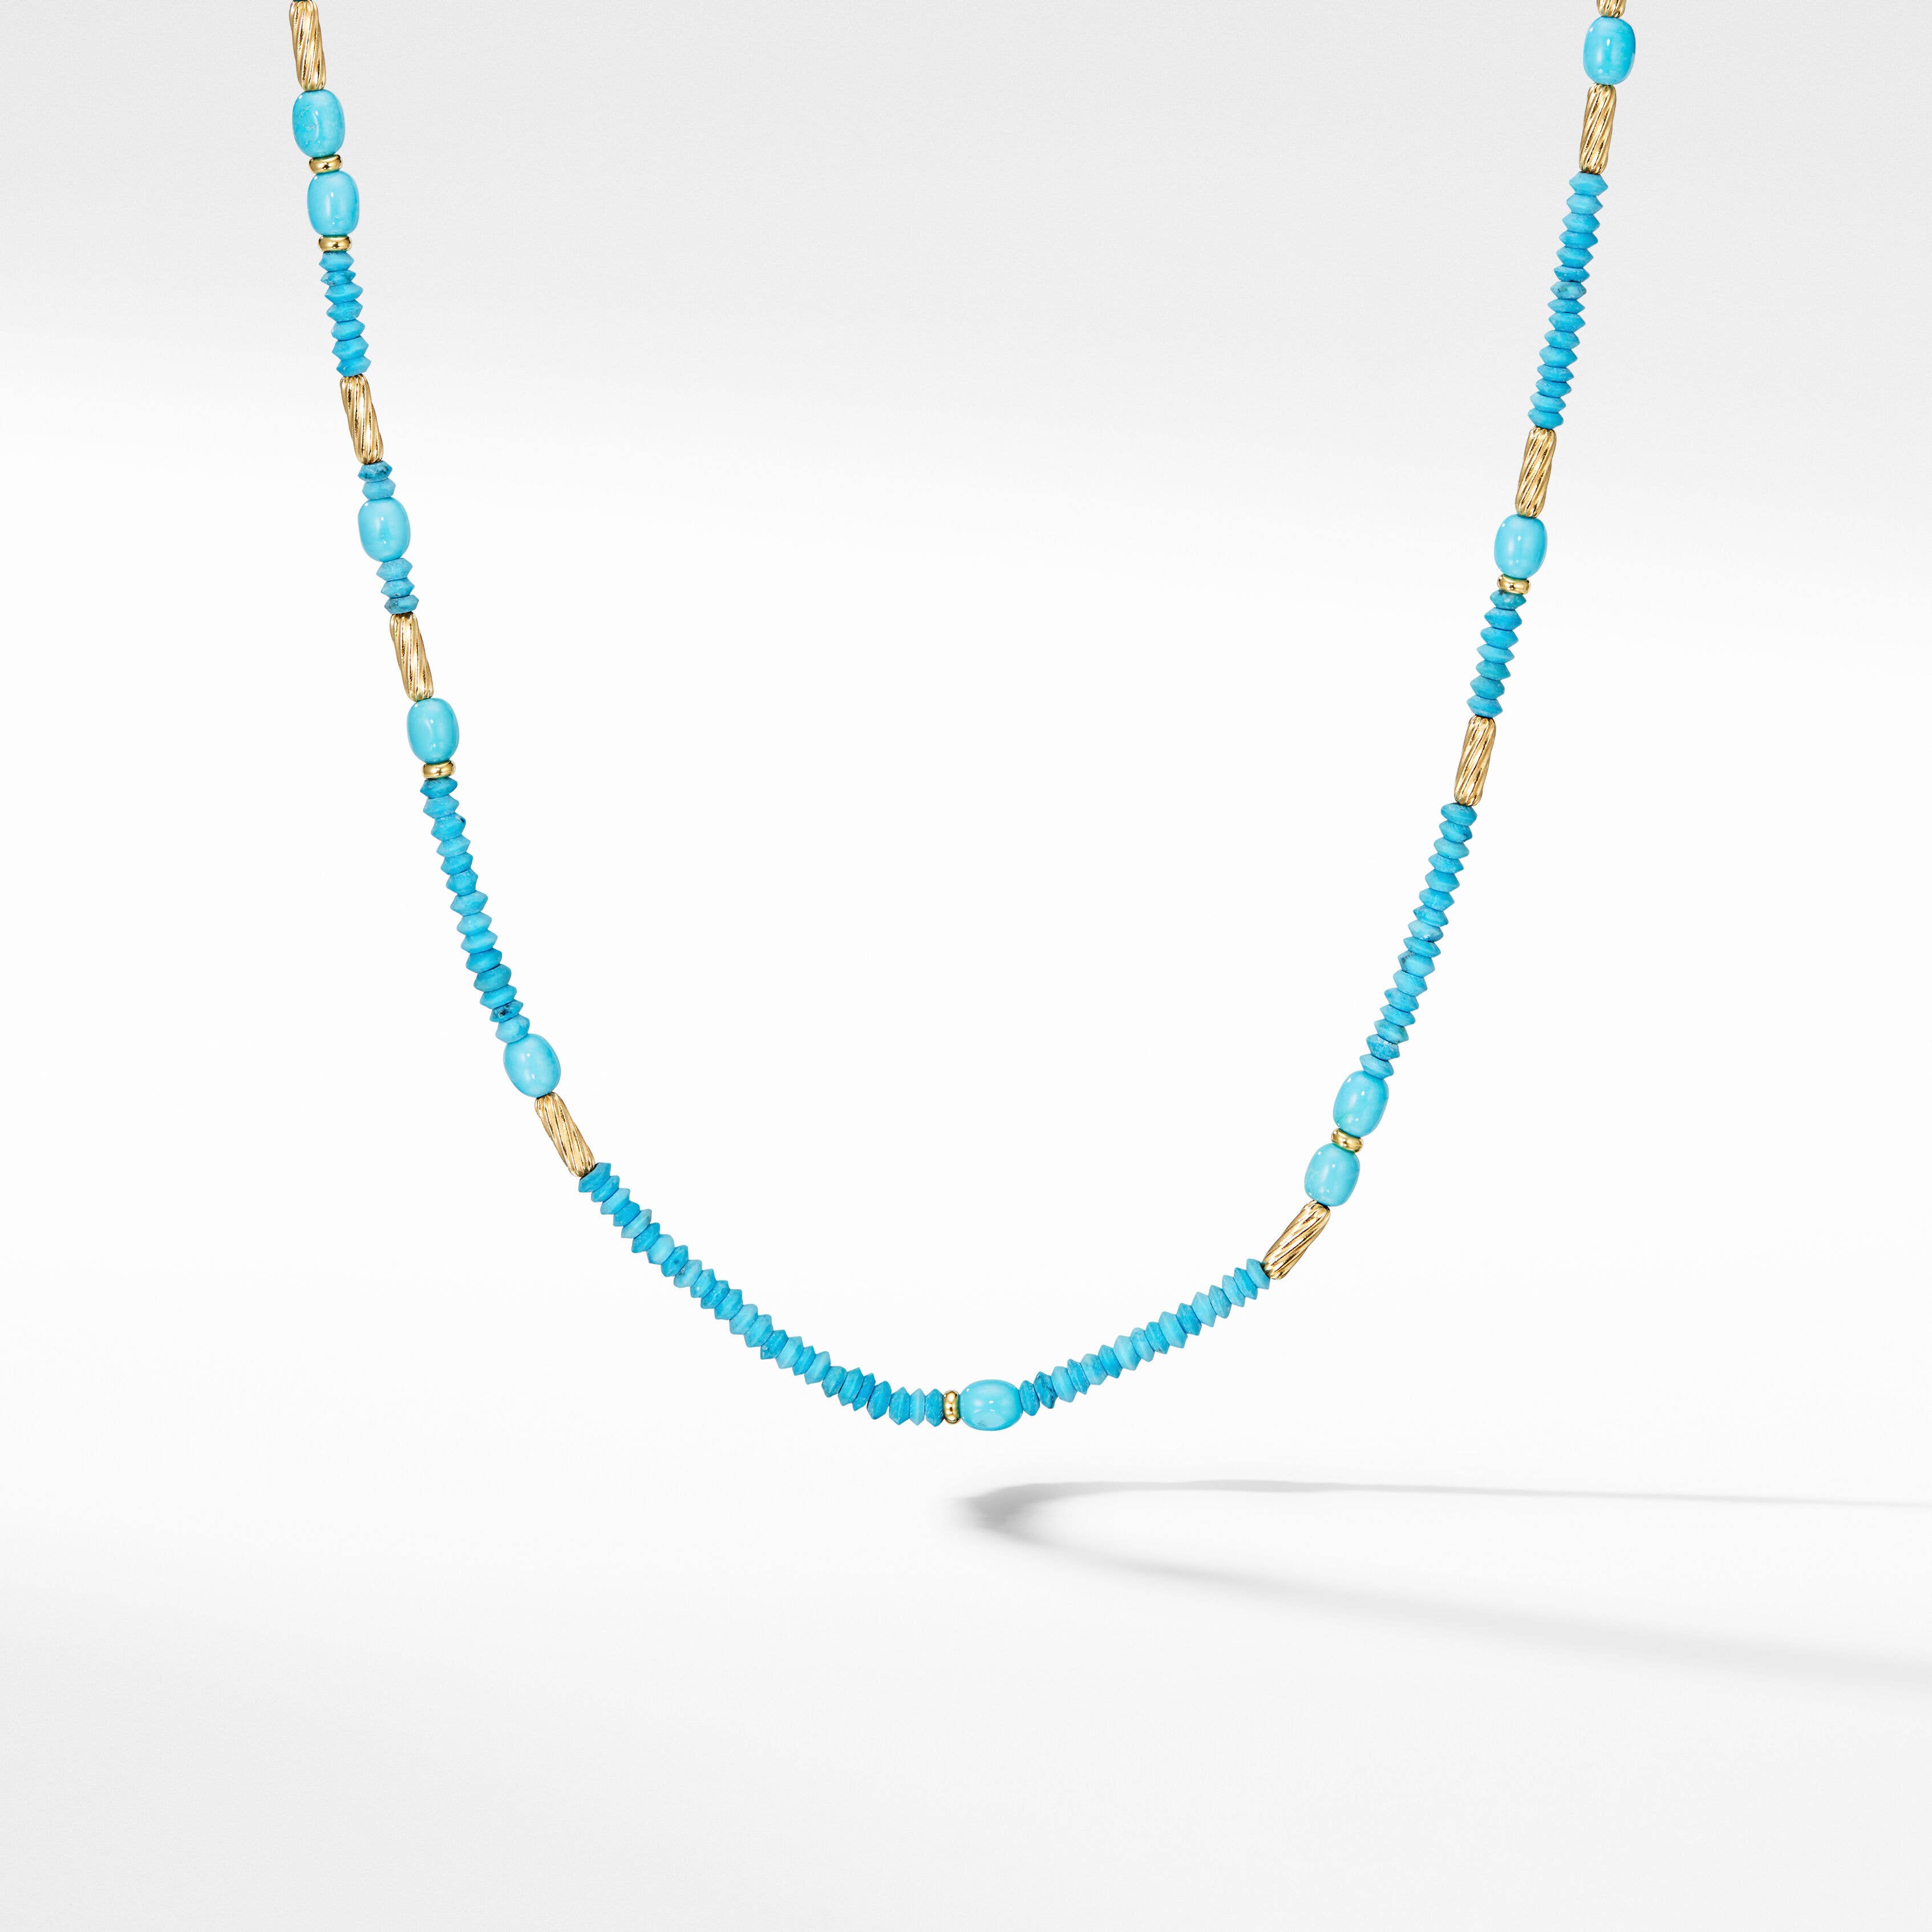 Tweejoux Necklace with Serpentine, Turquoise and 18K Yellow Gold